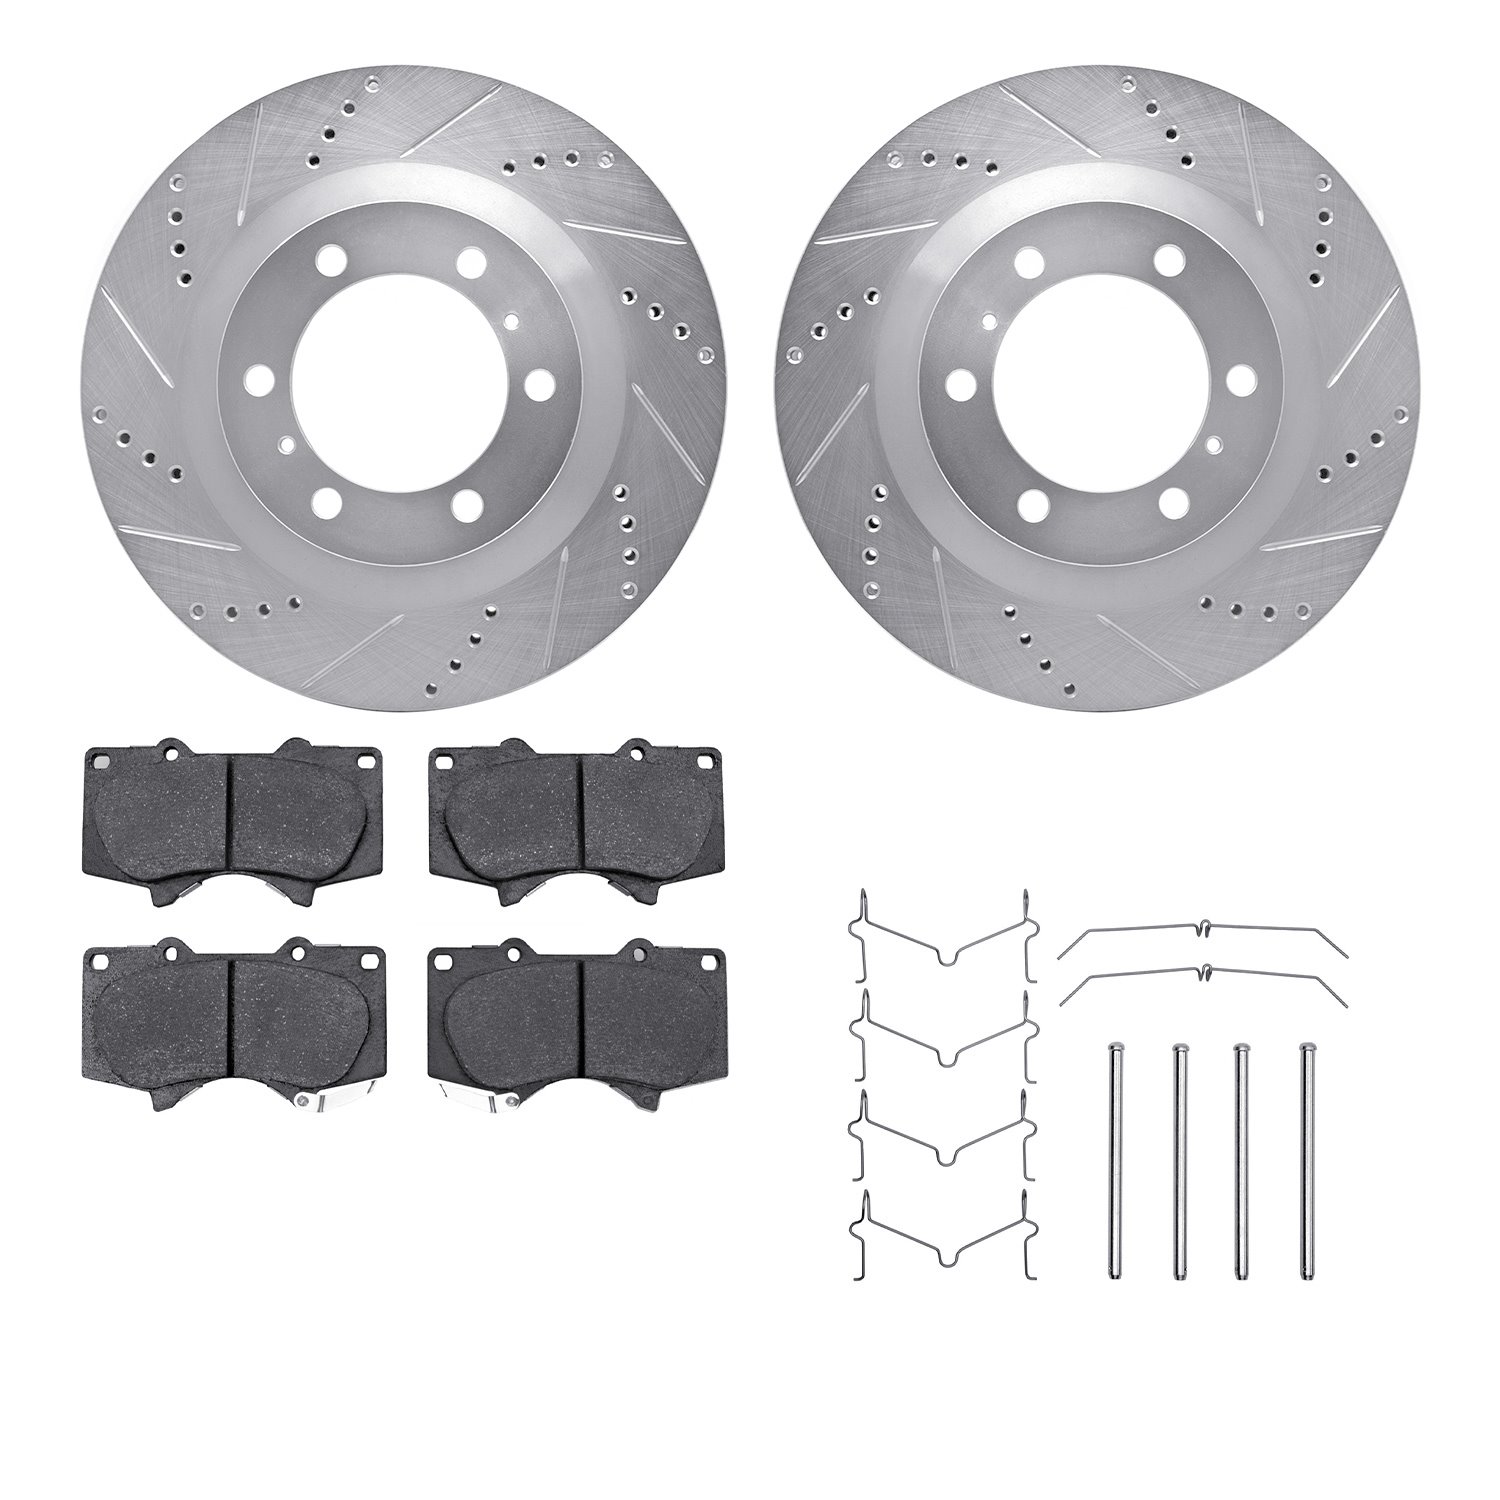 7412-76022 Drilled/Slotted Brake Rotors with Ultimate-Duty Brake Pads Kit & Hardware [Silver], Fits Select Lexus/Toyota/Scion, P